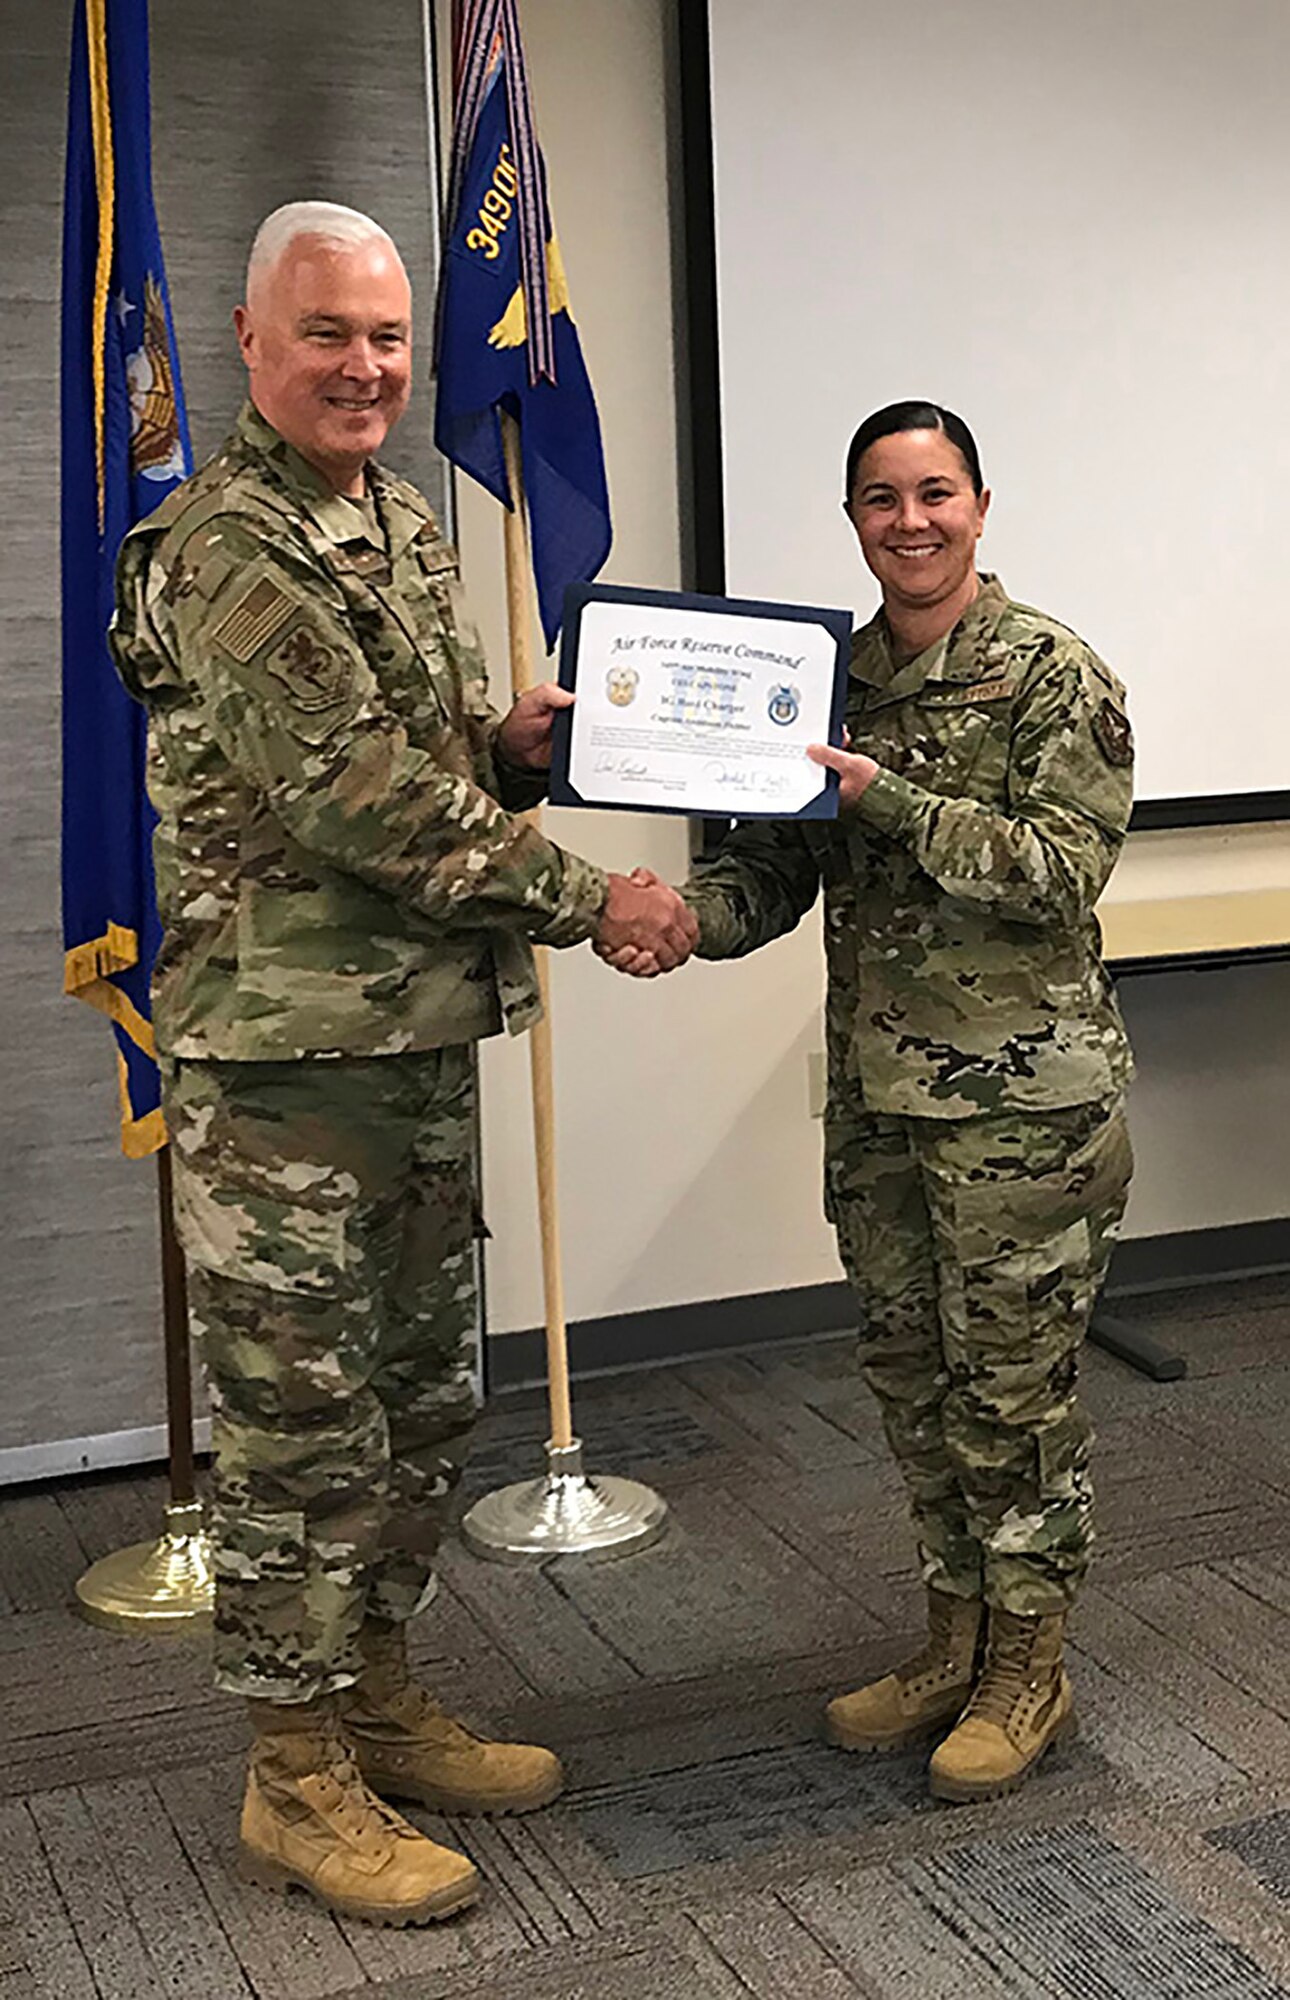 Col. Scott McLaughlin, 349th Air Mobility Wing Commander, and 349th AMW Command Chief, Chief Master Sgt. Jimmy Burmeister, took the opportunity this past UTA to reach out and give a special "thank you" to all the Unit Effectiveness Inspection Superior Performers.